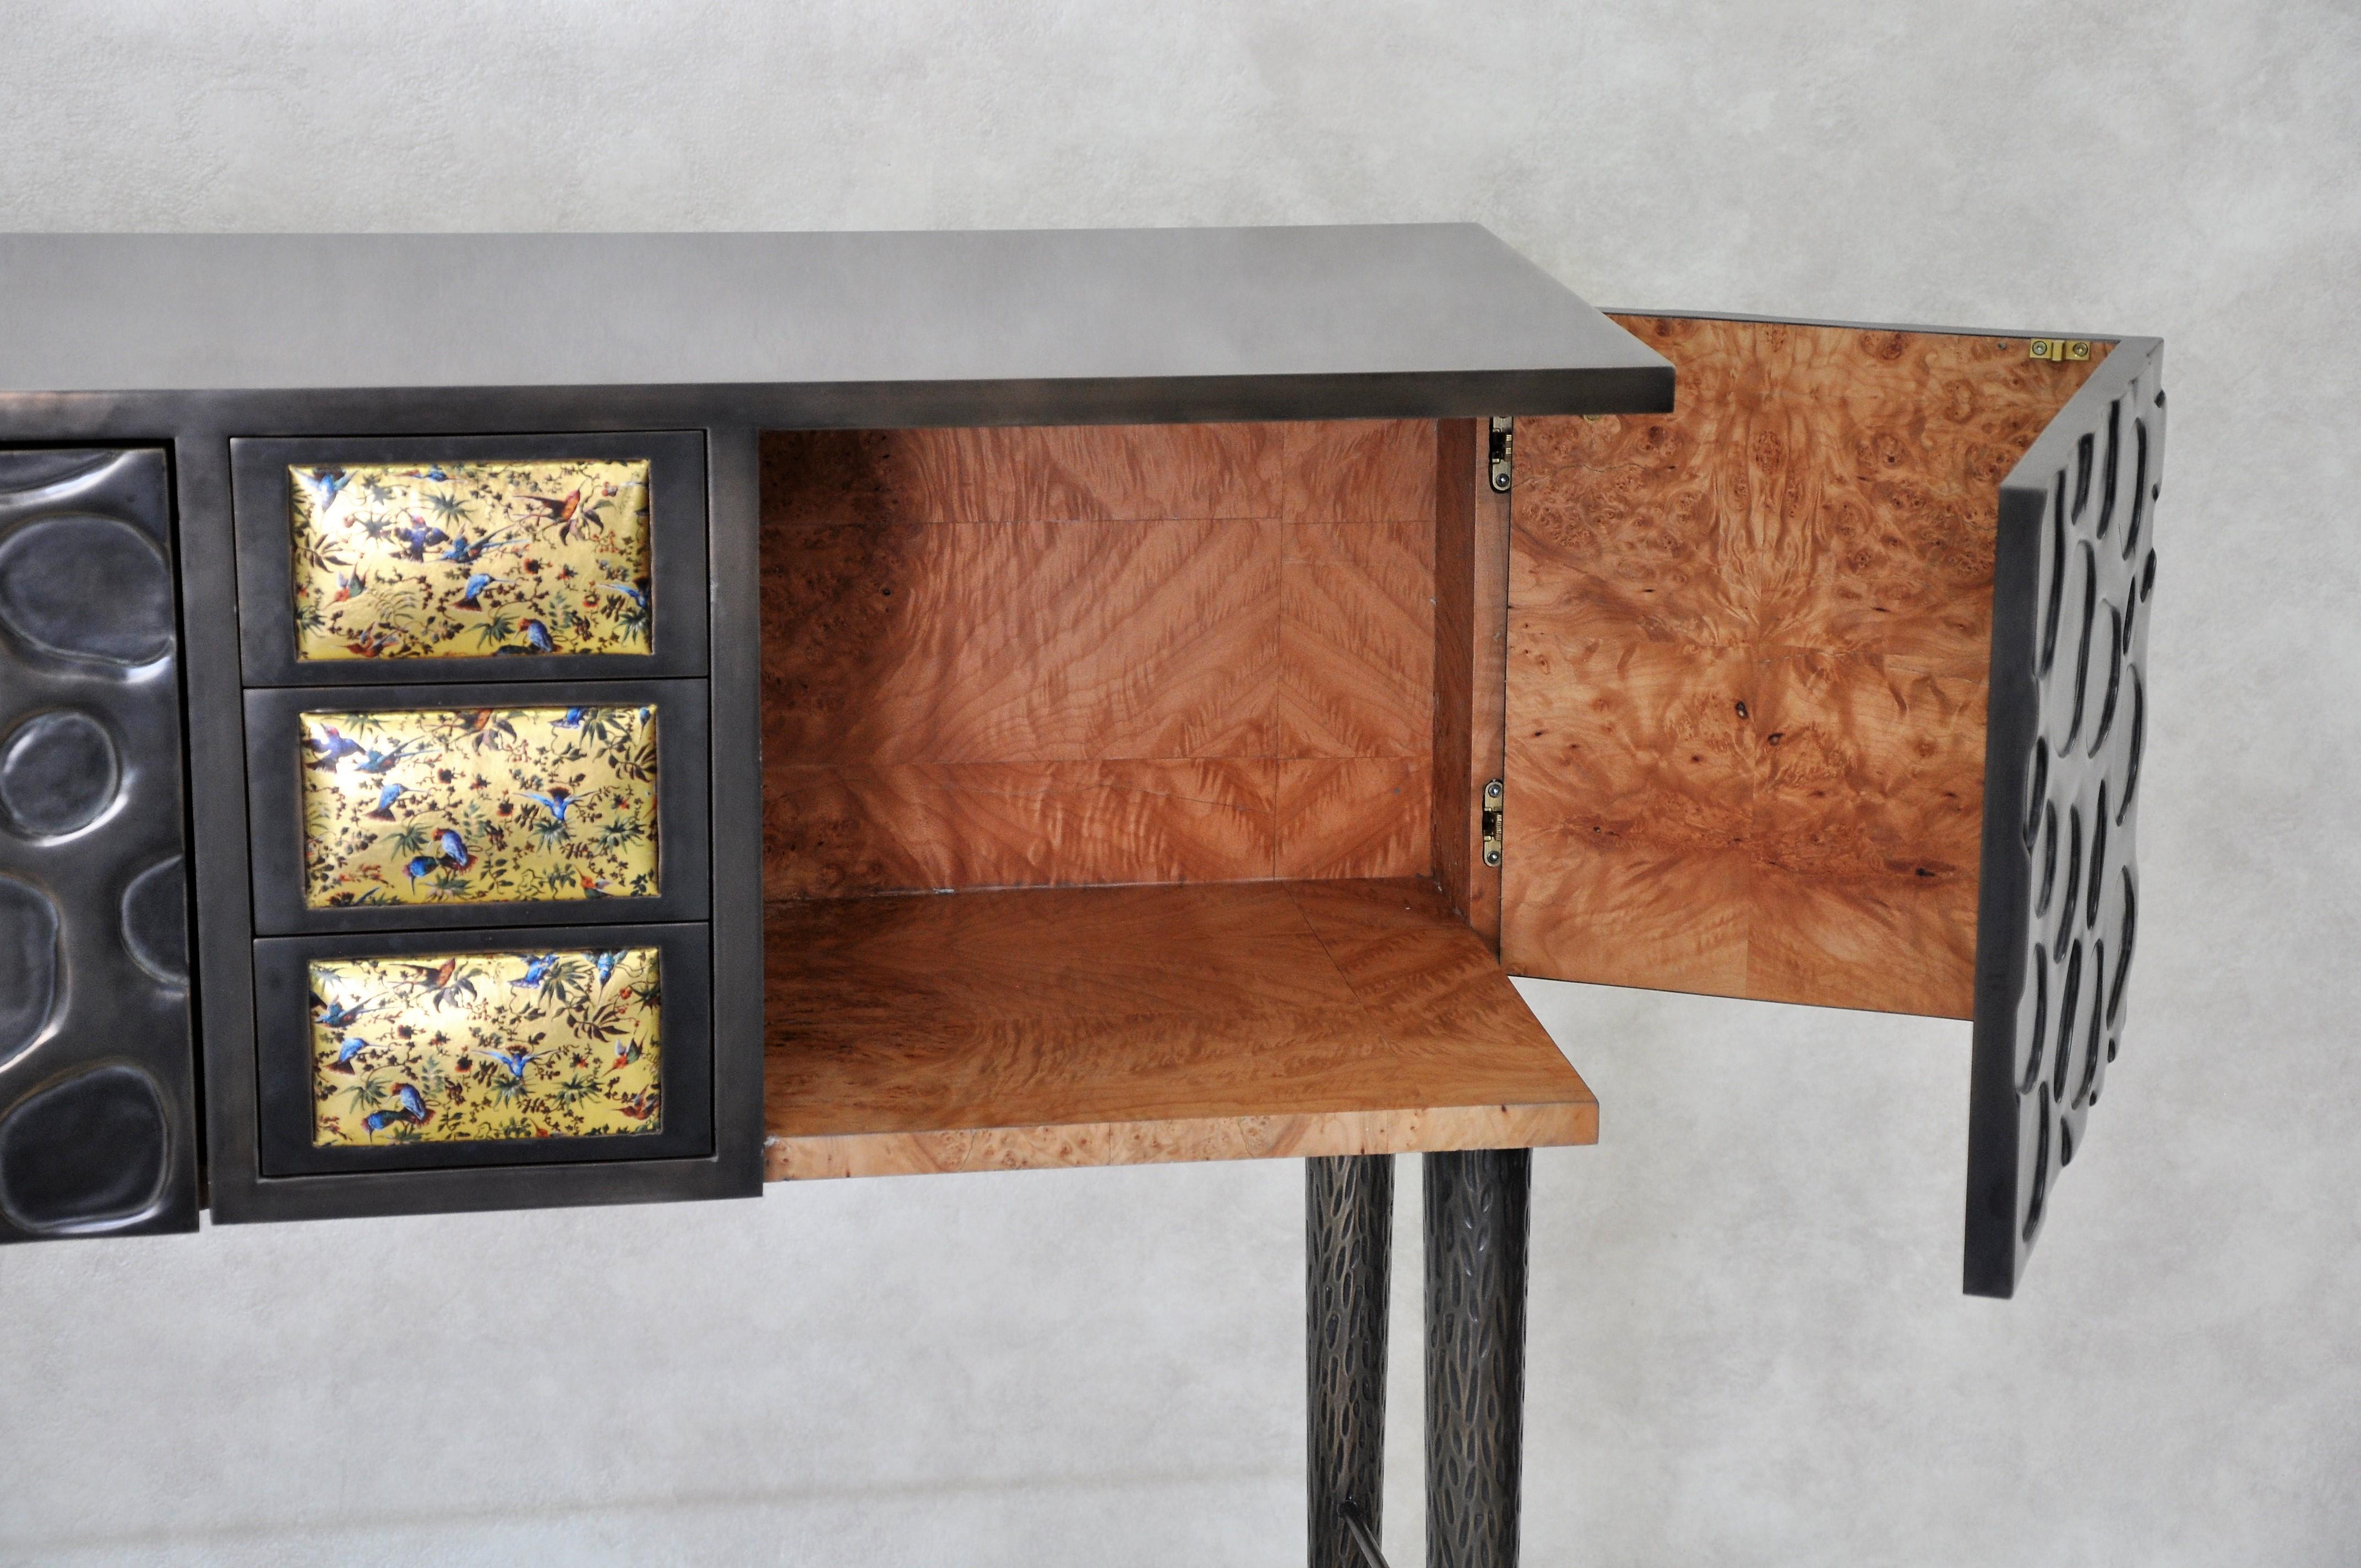 Burnished bronze over carved wood. Inside in polished maple burl veneer.
Drawer fronts covered with gilded leather.
Dimensions: H 105 x W 80 x D 40 cm. Edition of 3 (1 sold).
French contemporary artist and craftswoman Frédérique Domergue creates